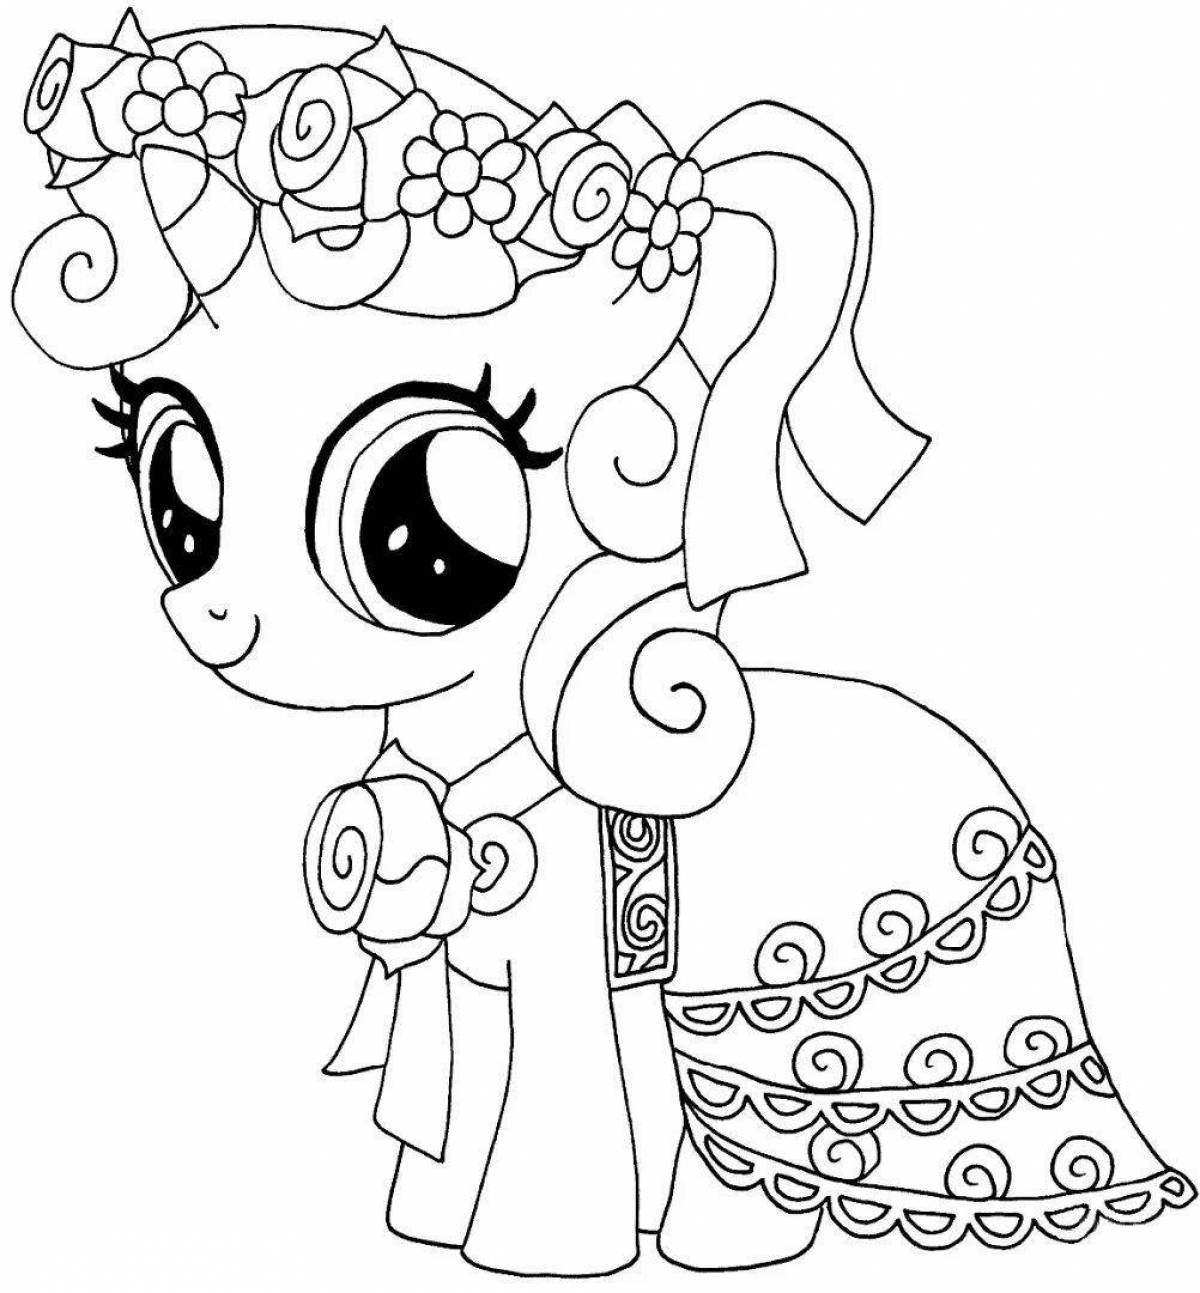 Attractive coloring pages for little girls